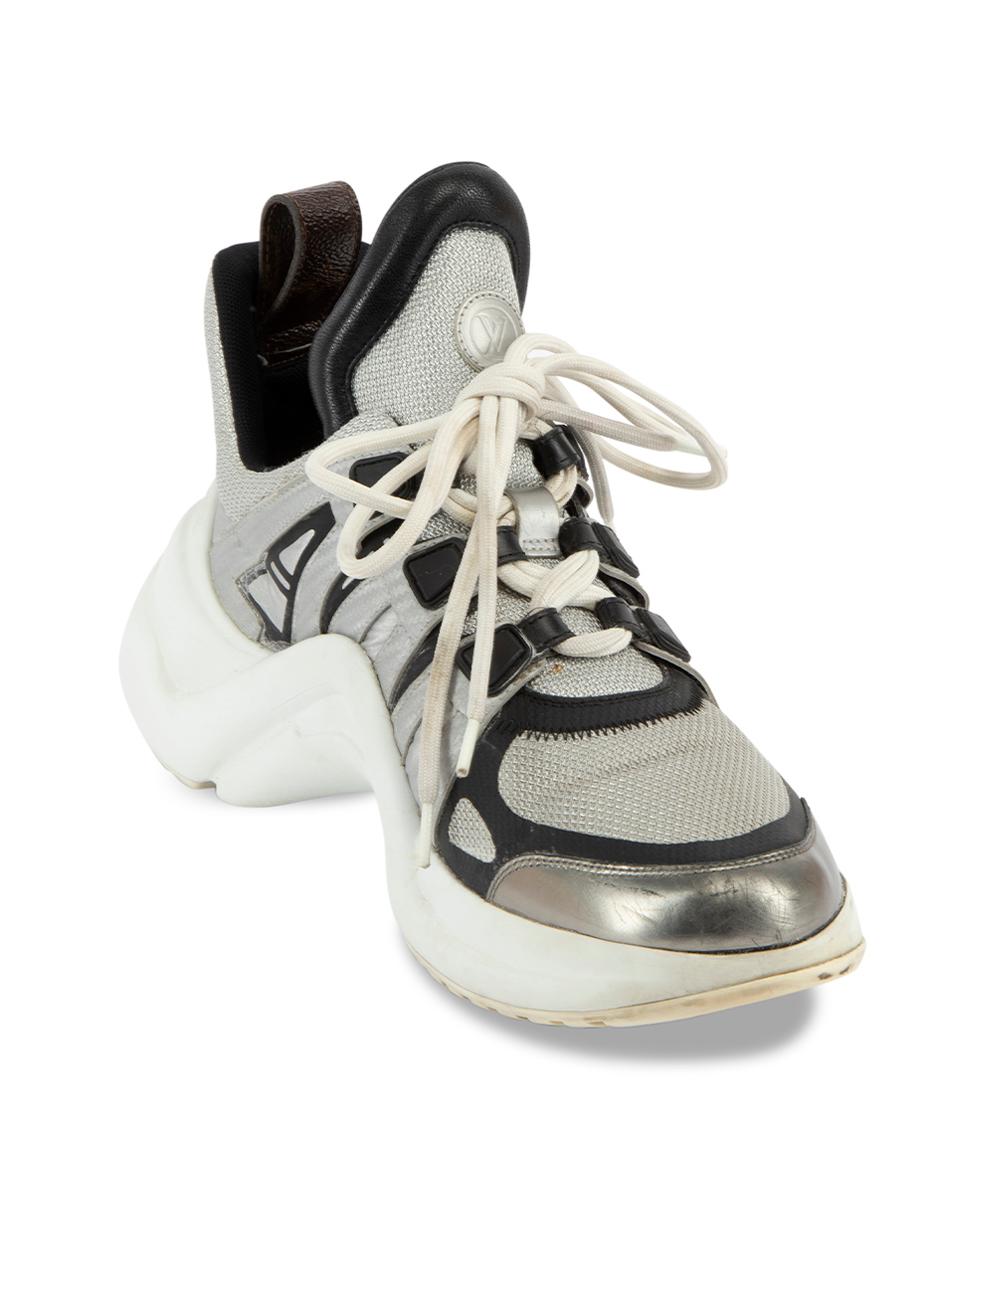 Louis Vuitton Archlight - 15 For Sale on 1stDibs  louis vuitton archlight  sneakers price, lv archlight sneaker price, louis vuitton archlight price